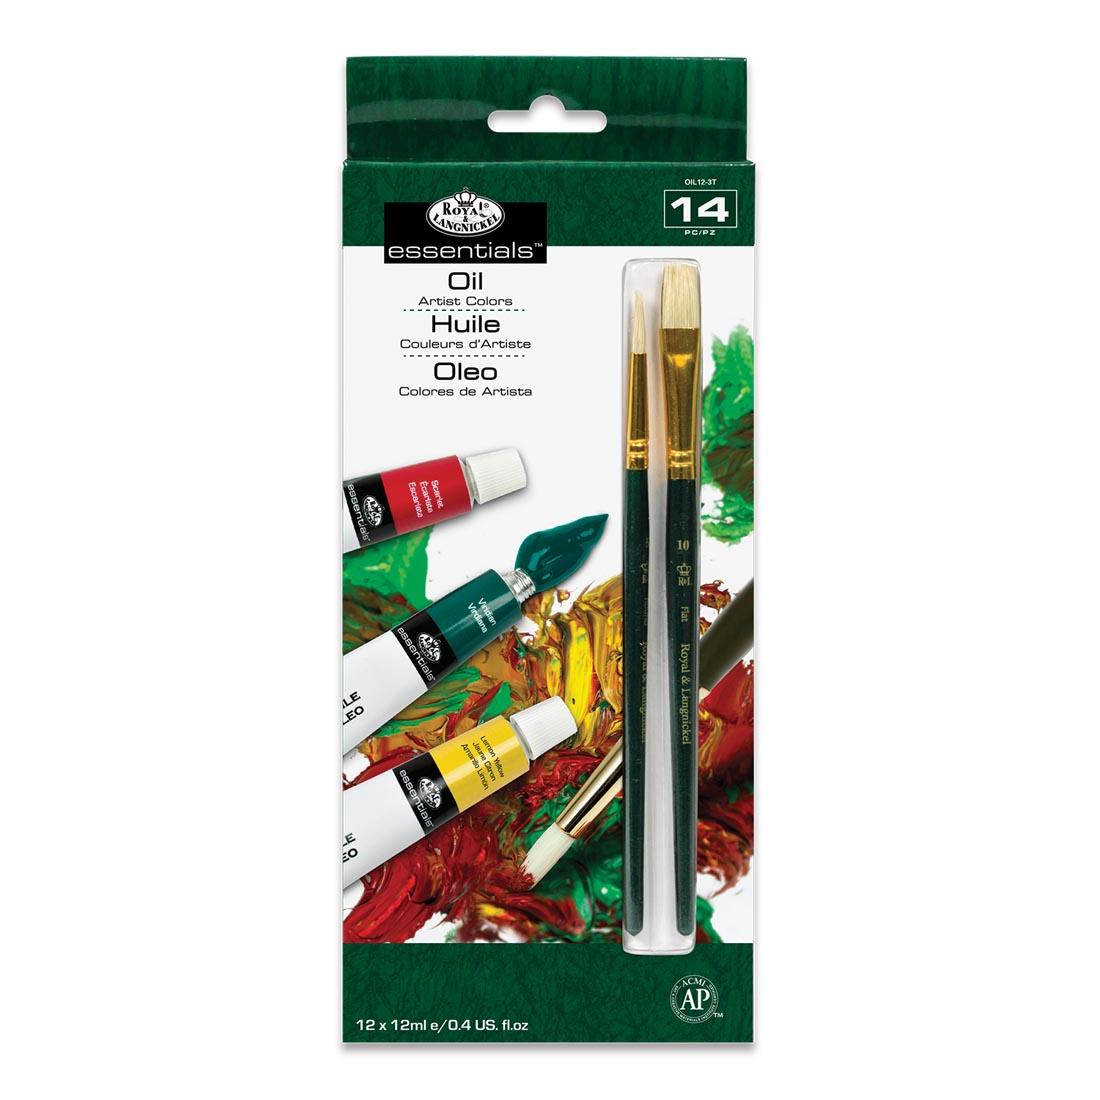 Royal & Langnickel Oil Artist Colors with two brushes